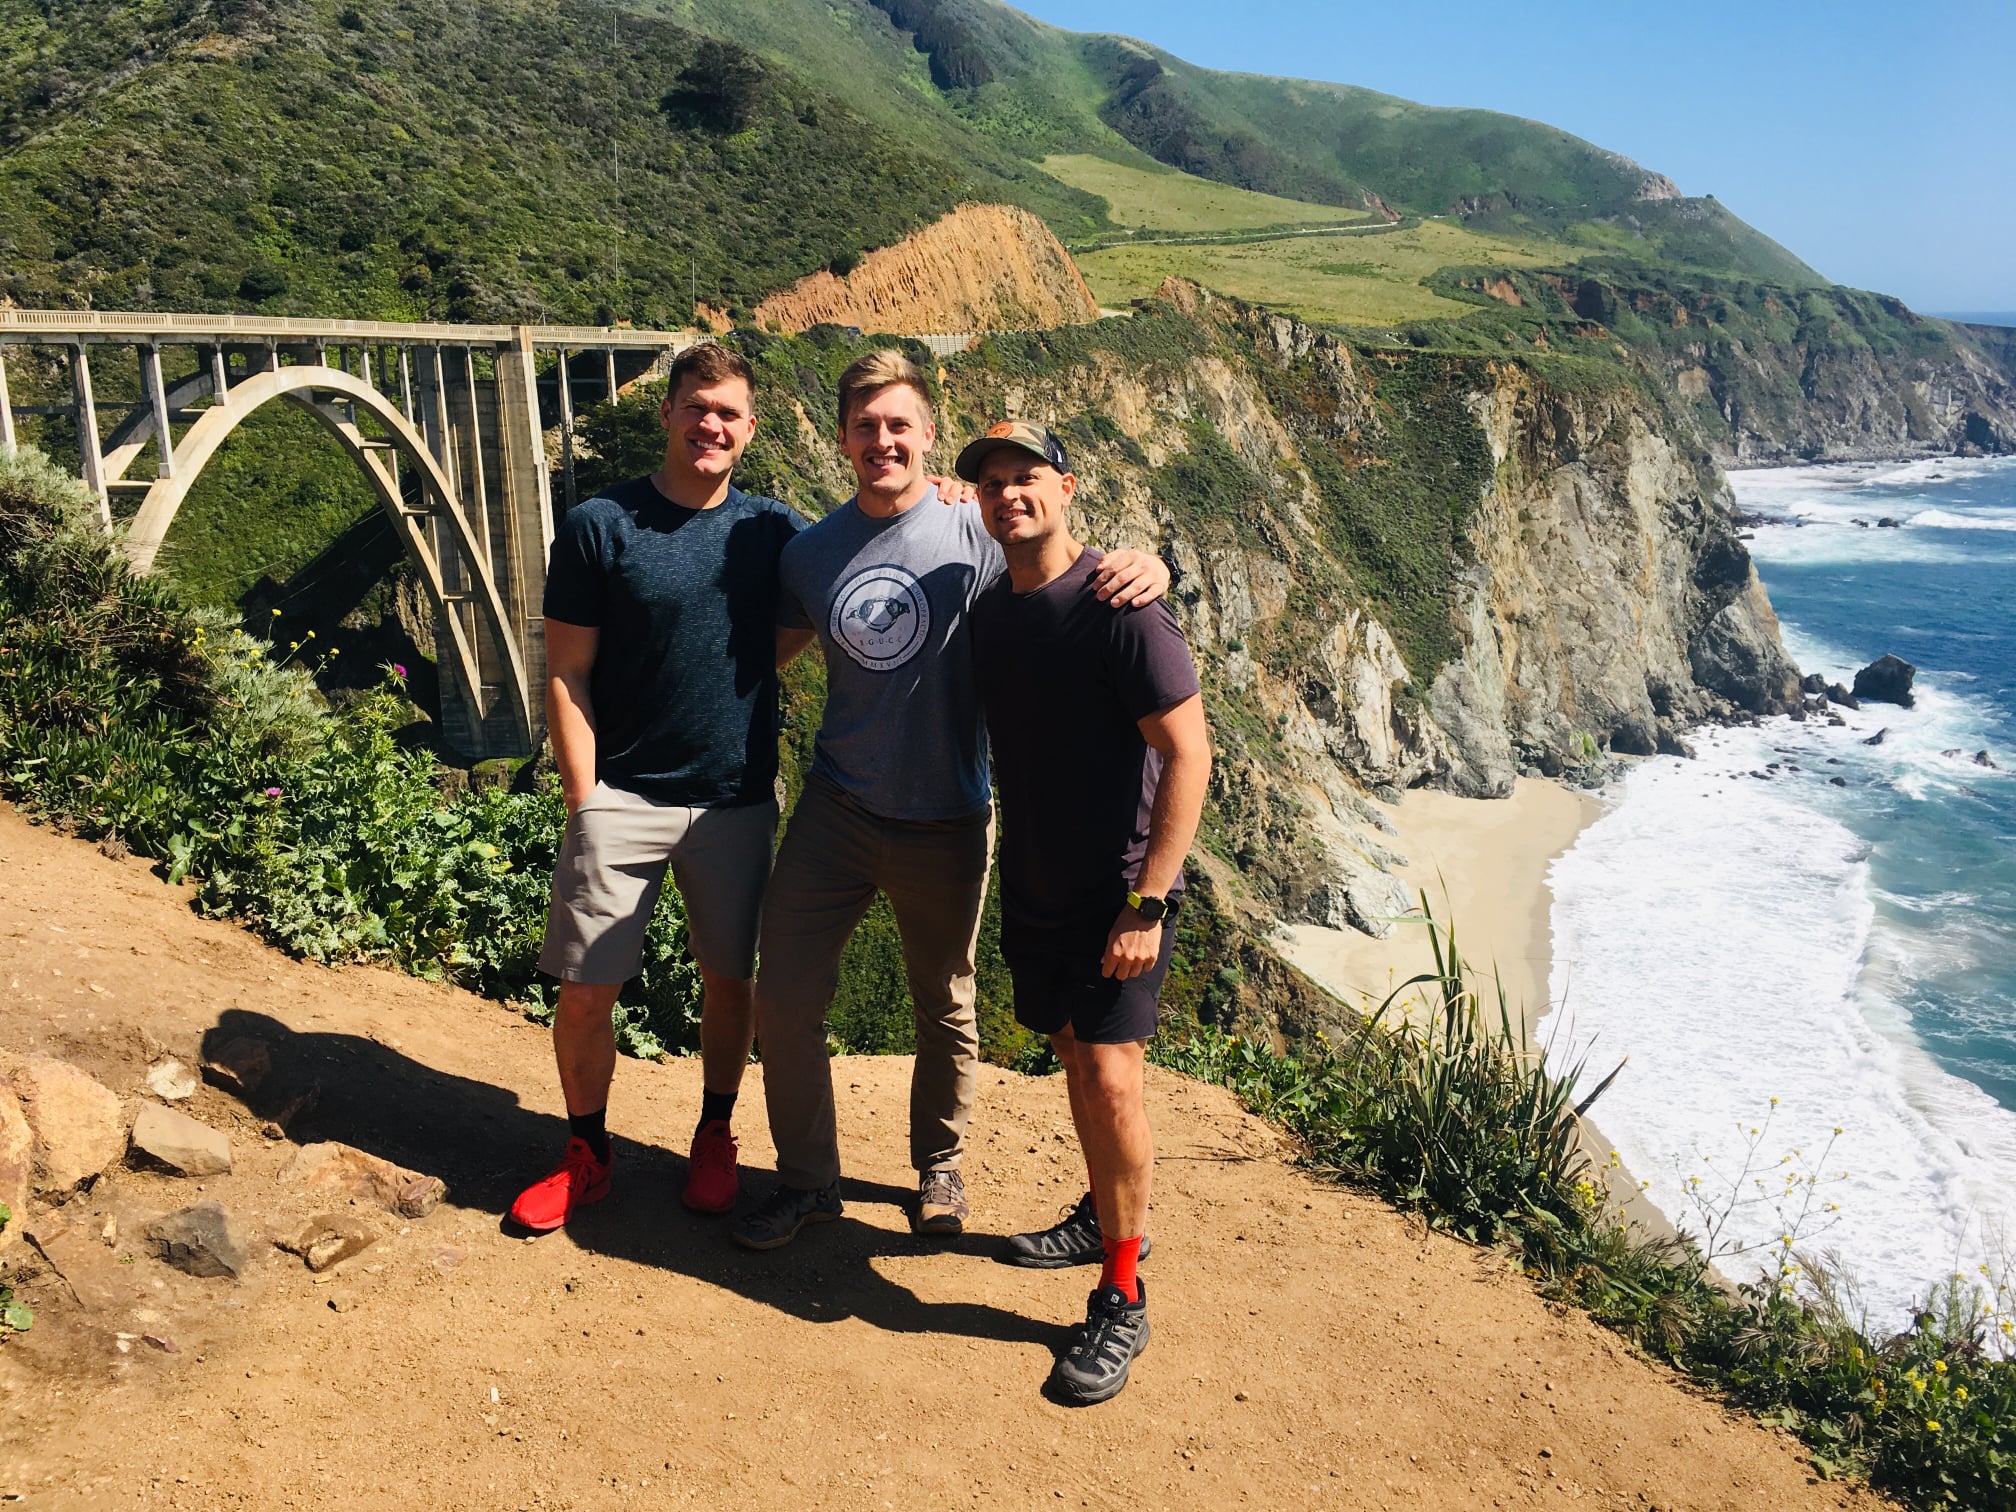 Dr. Ryan Klopfer and his friends on a hike with beautiful scenery in the background